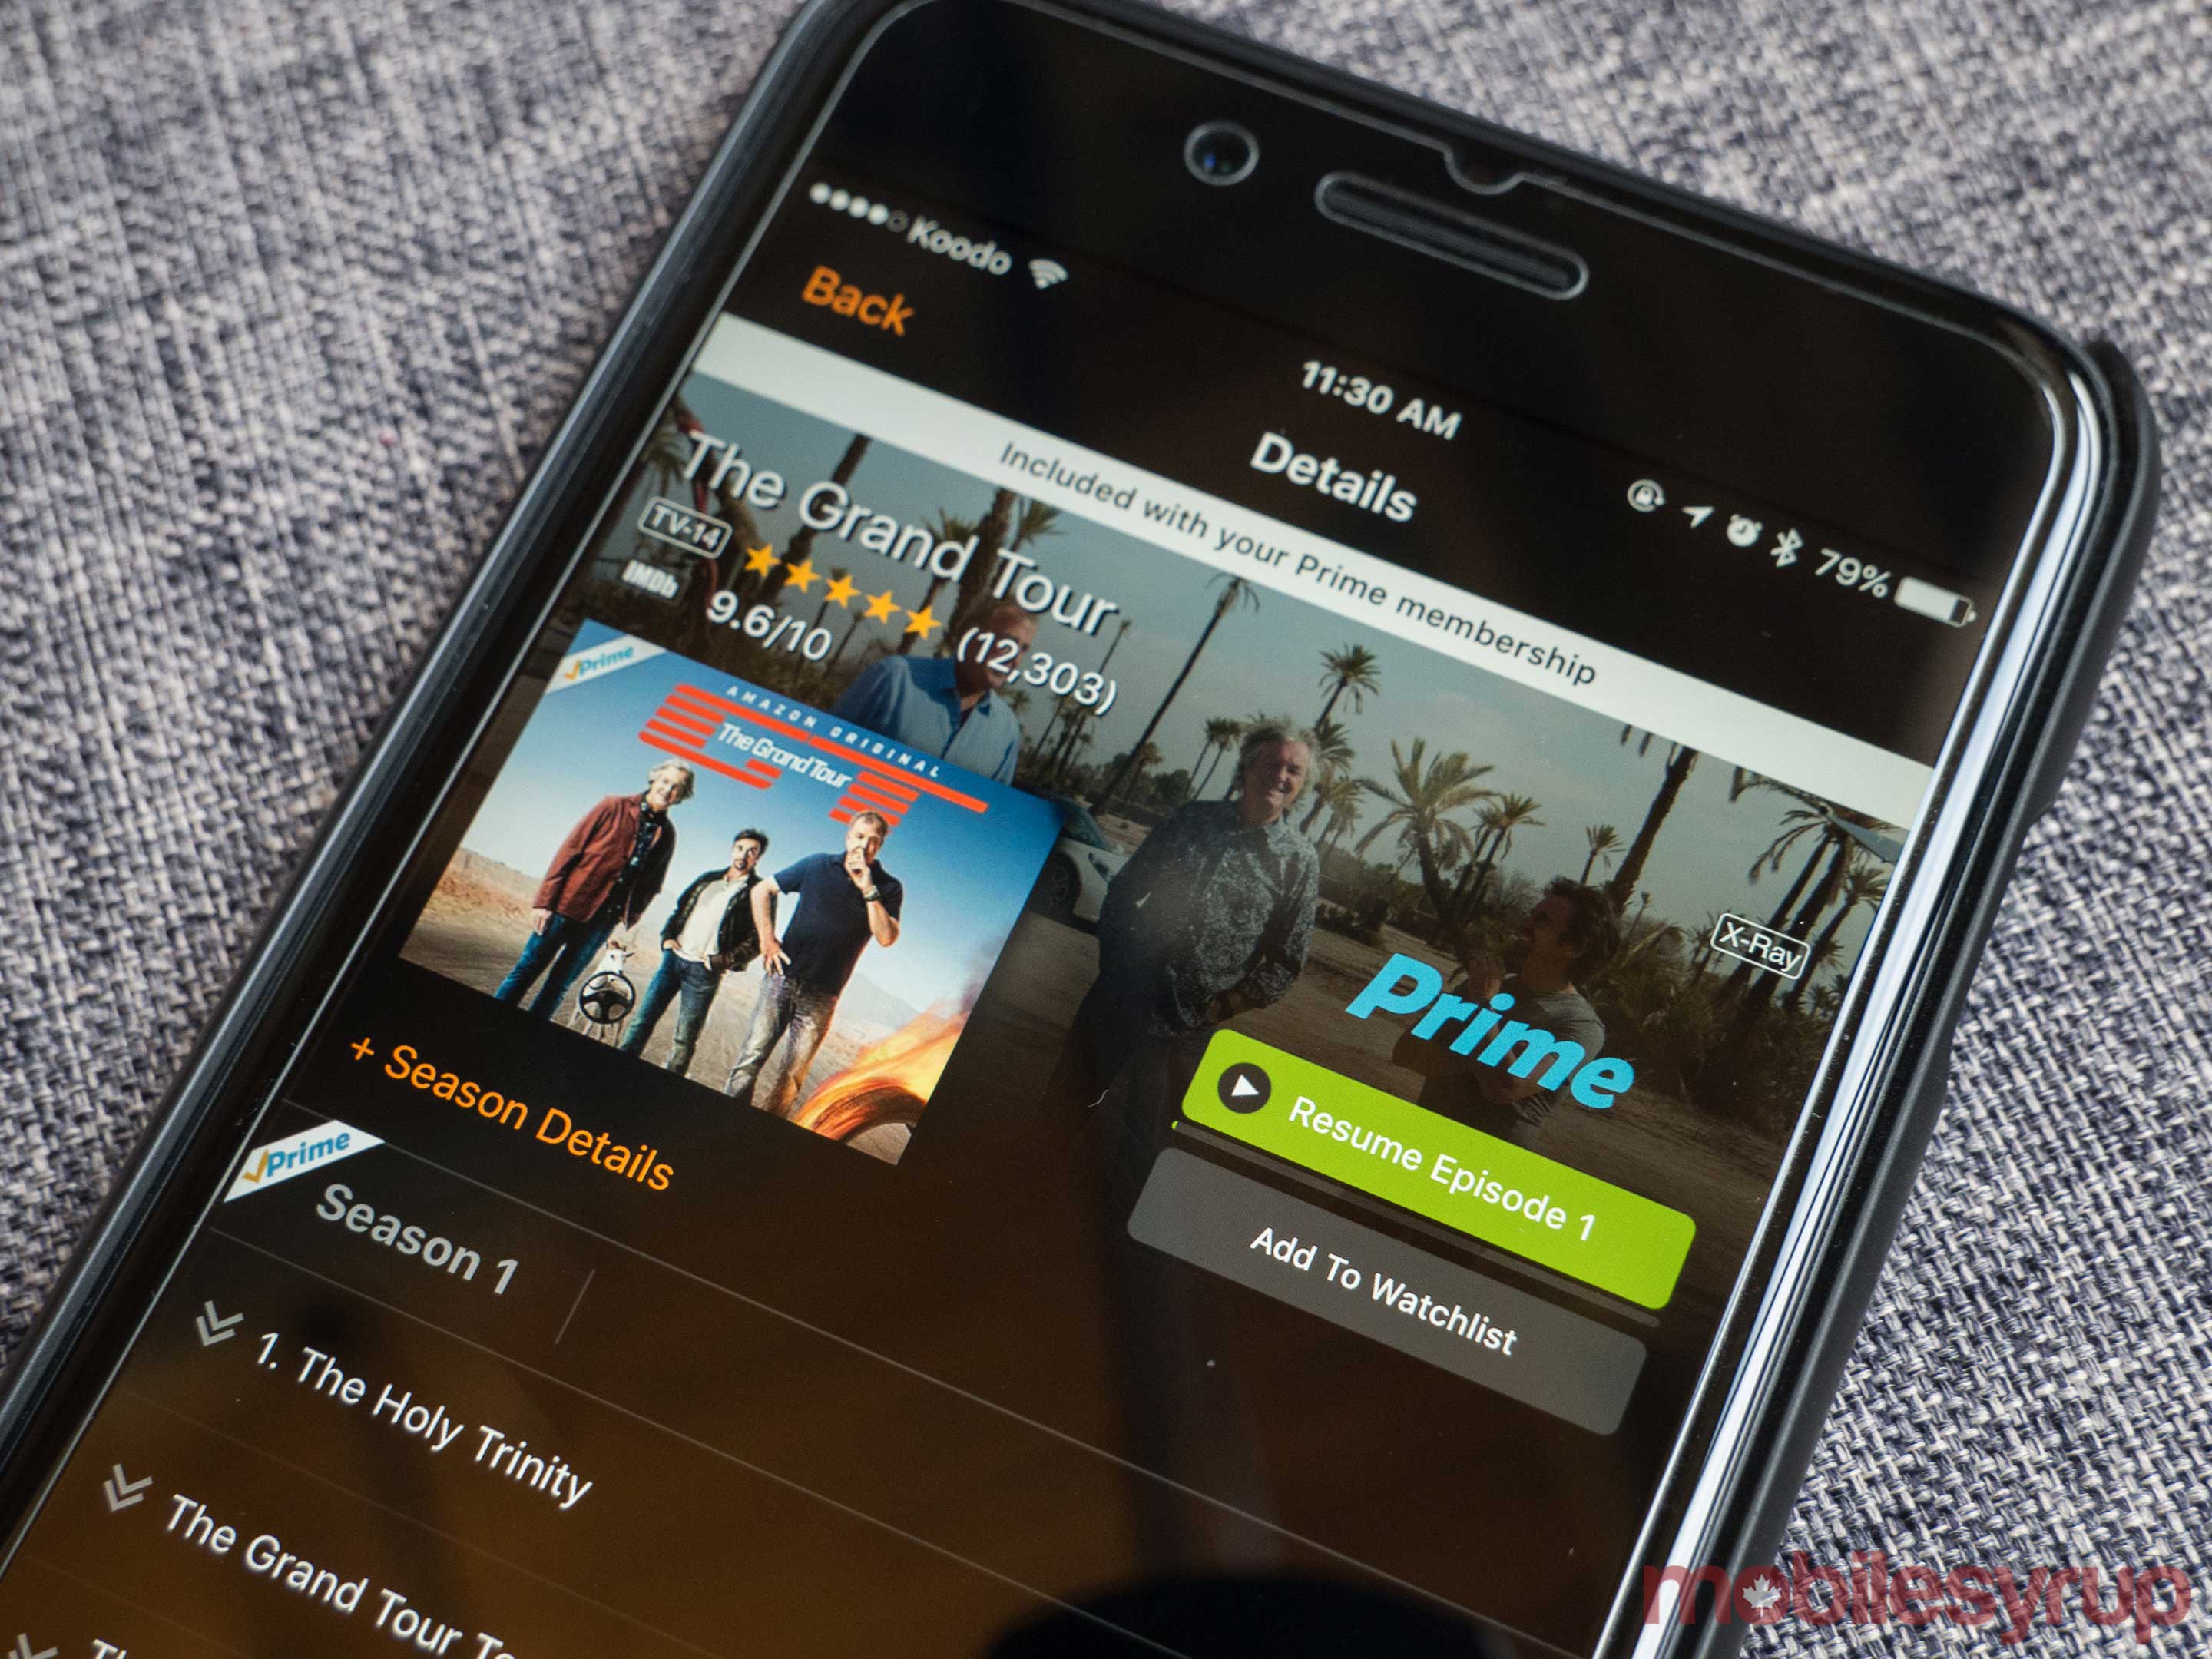 Amazon Prime Video is now available on BT TVs 4K set top 